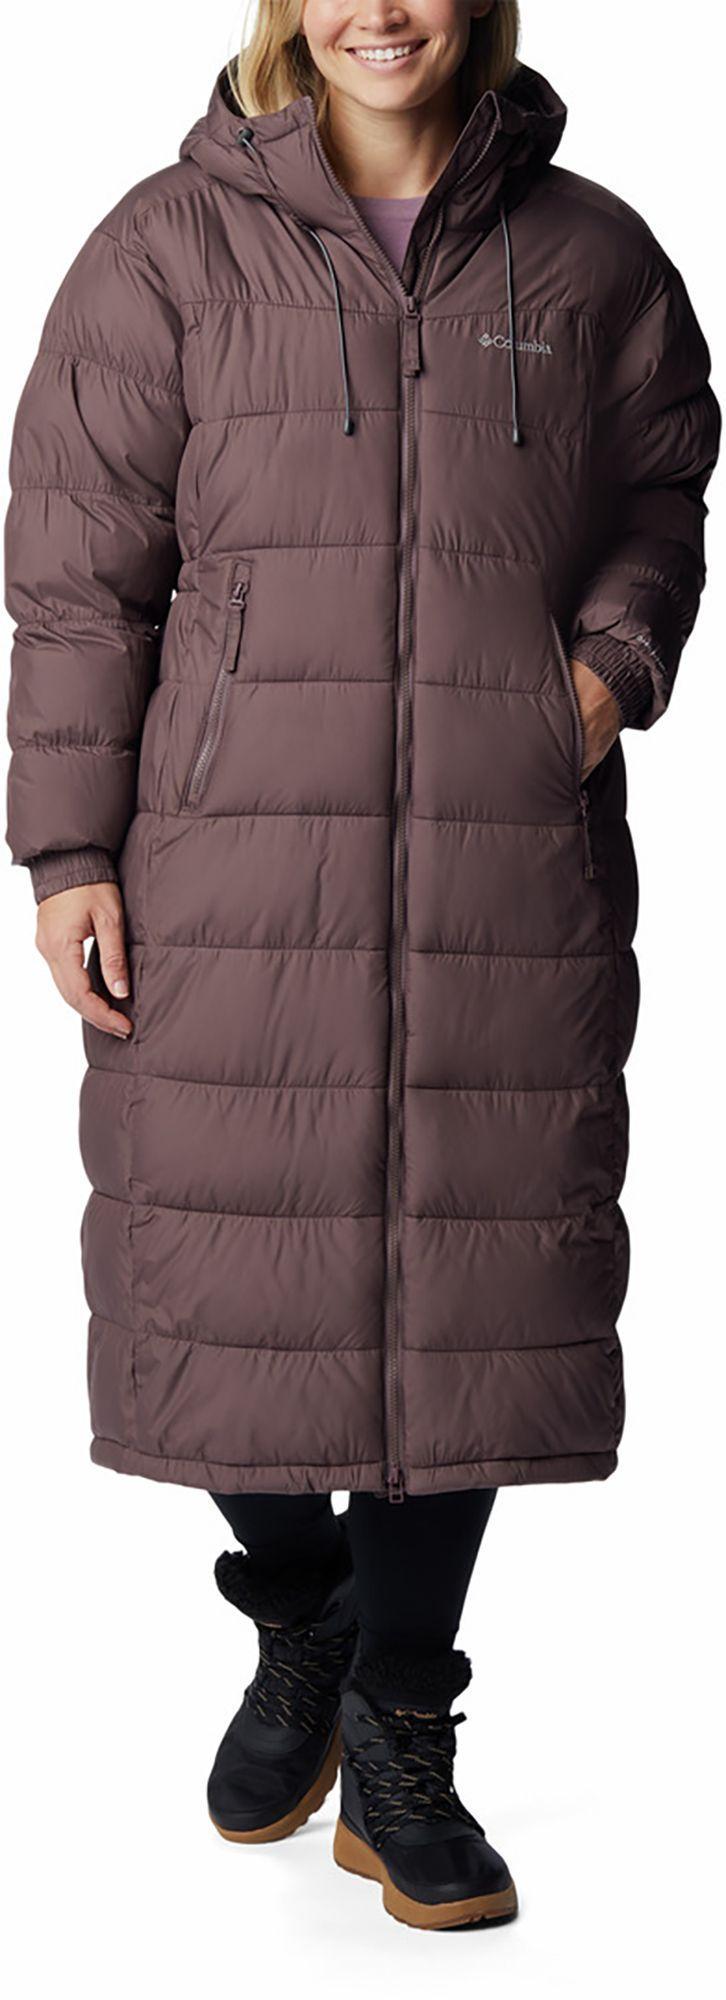 Columbia Pike Lake II Water Repellent Insulated Recycled Polyester Puffer Coat Product Image